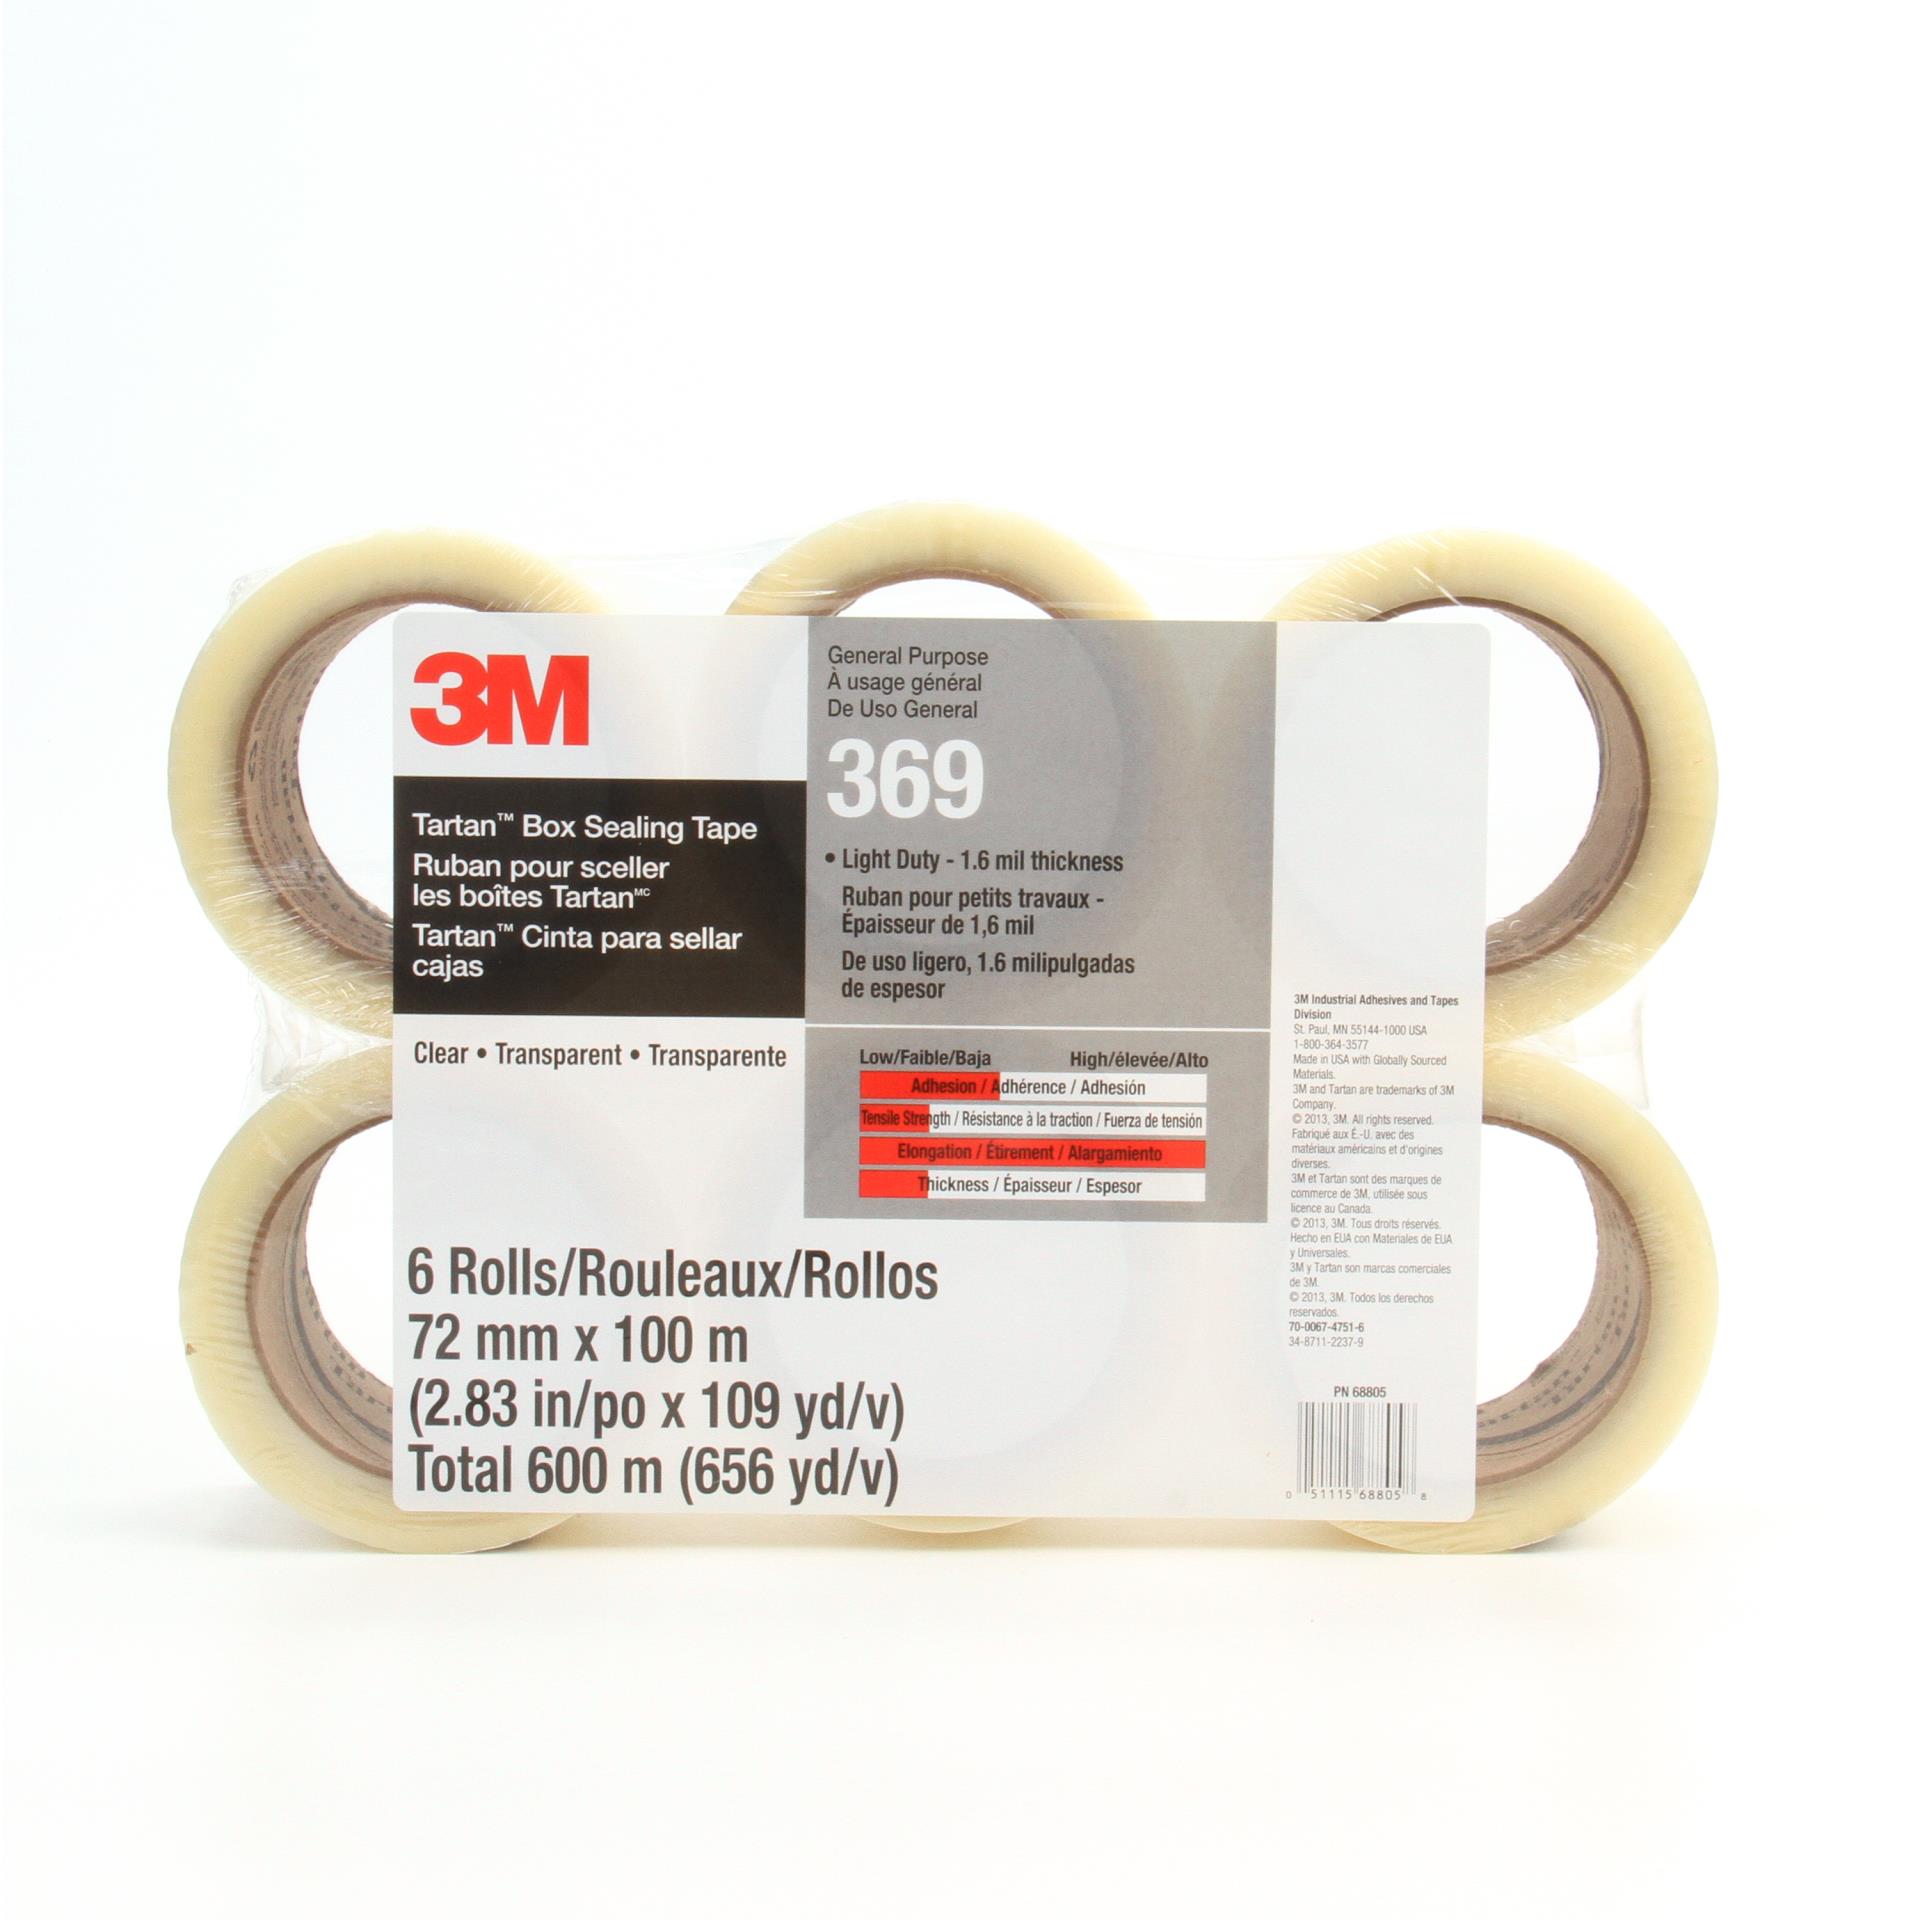 https://www.e-aircraftsupply.com/ItemImages/44/7010312444_Tartan_General_Use_Box_Sealing_Tape_369_Clear.jpg